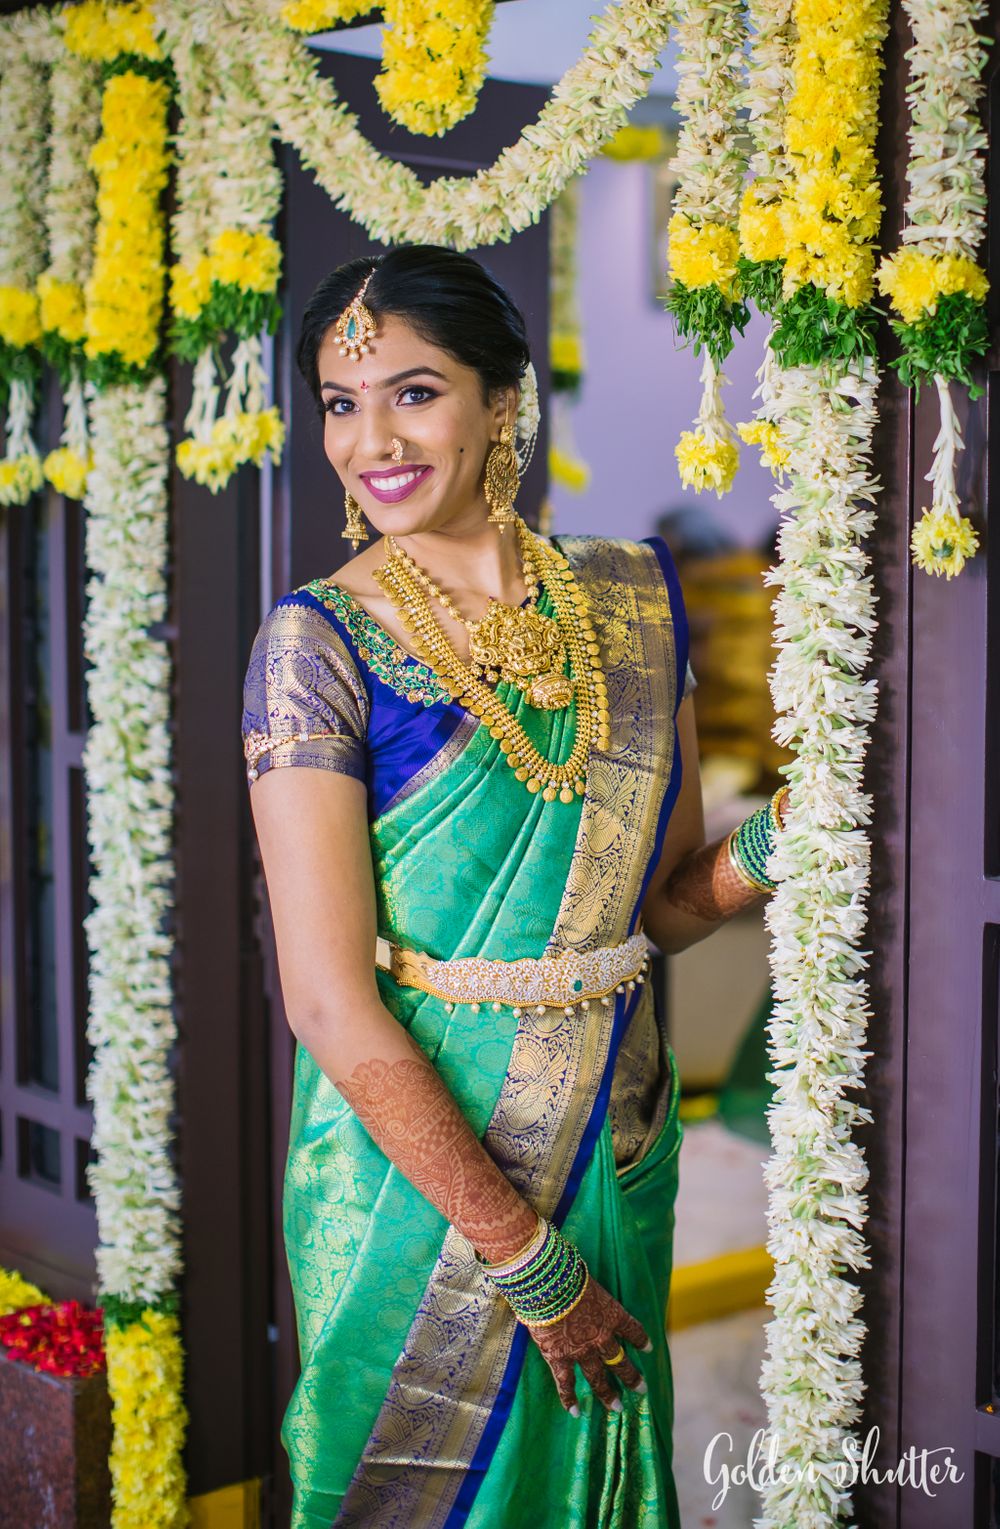 Photo of South Indian bride in an offbeat look